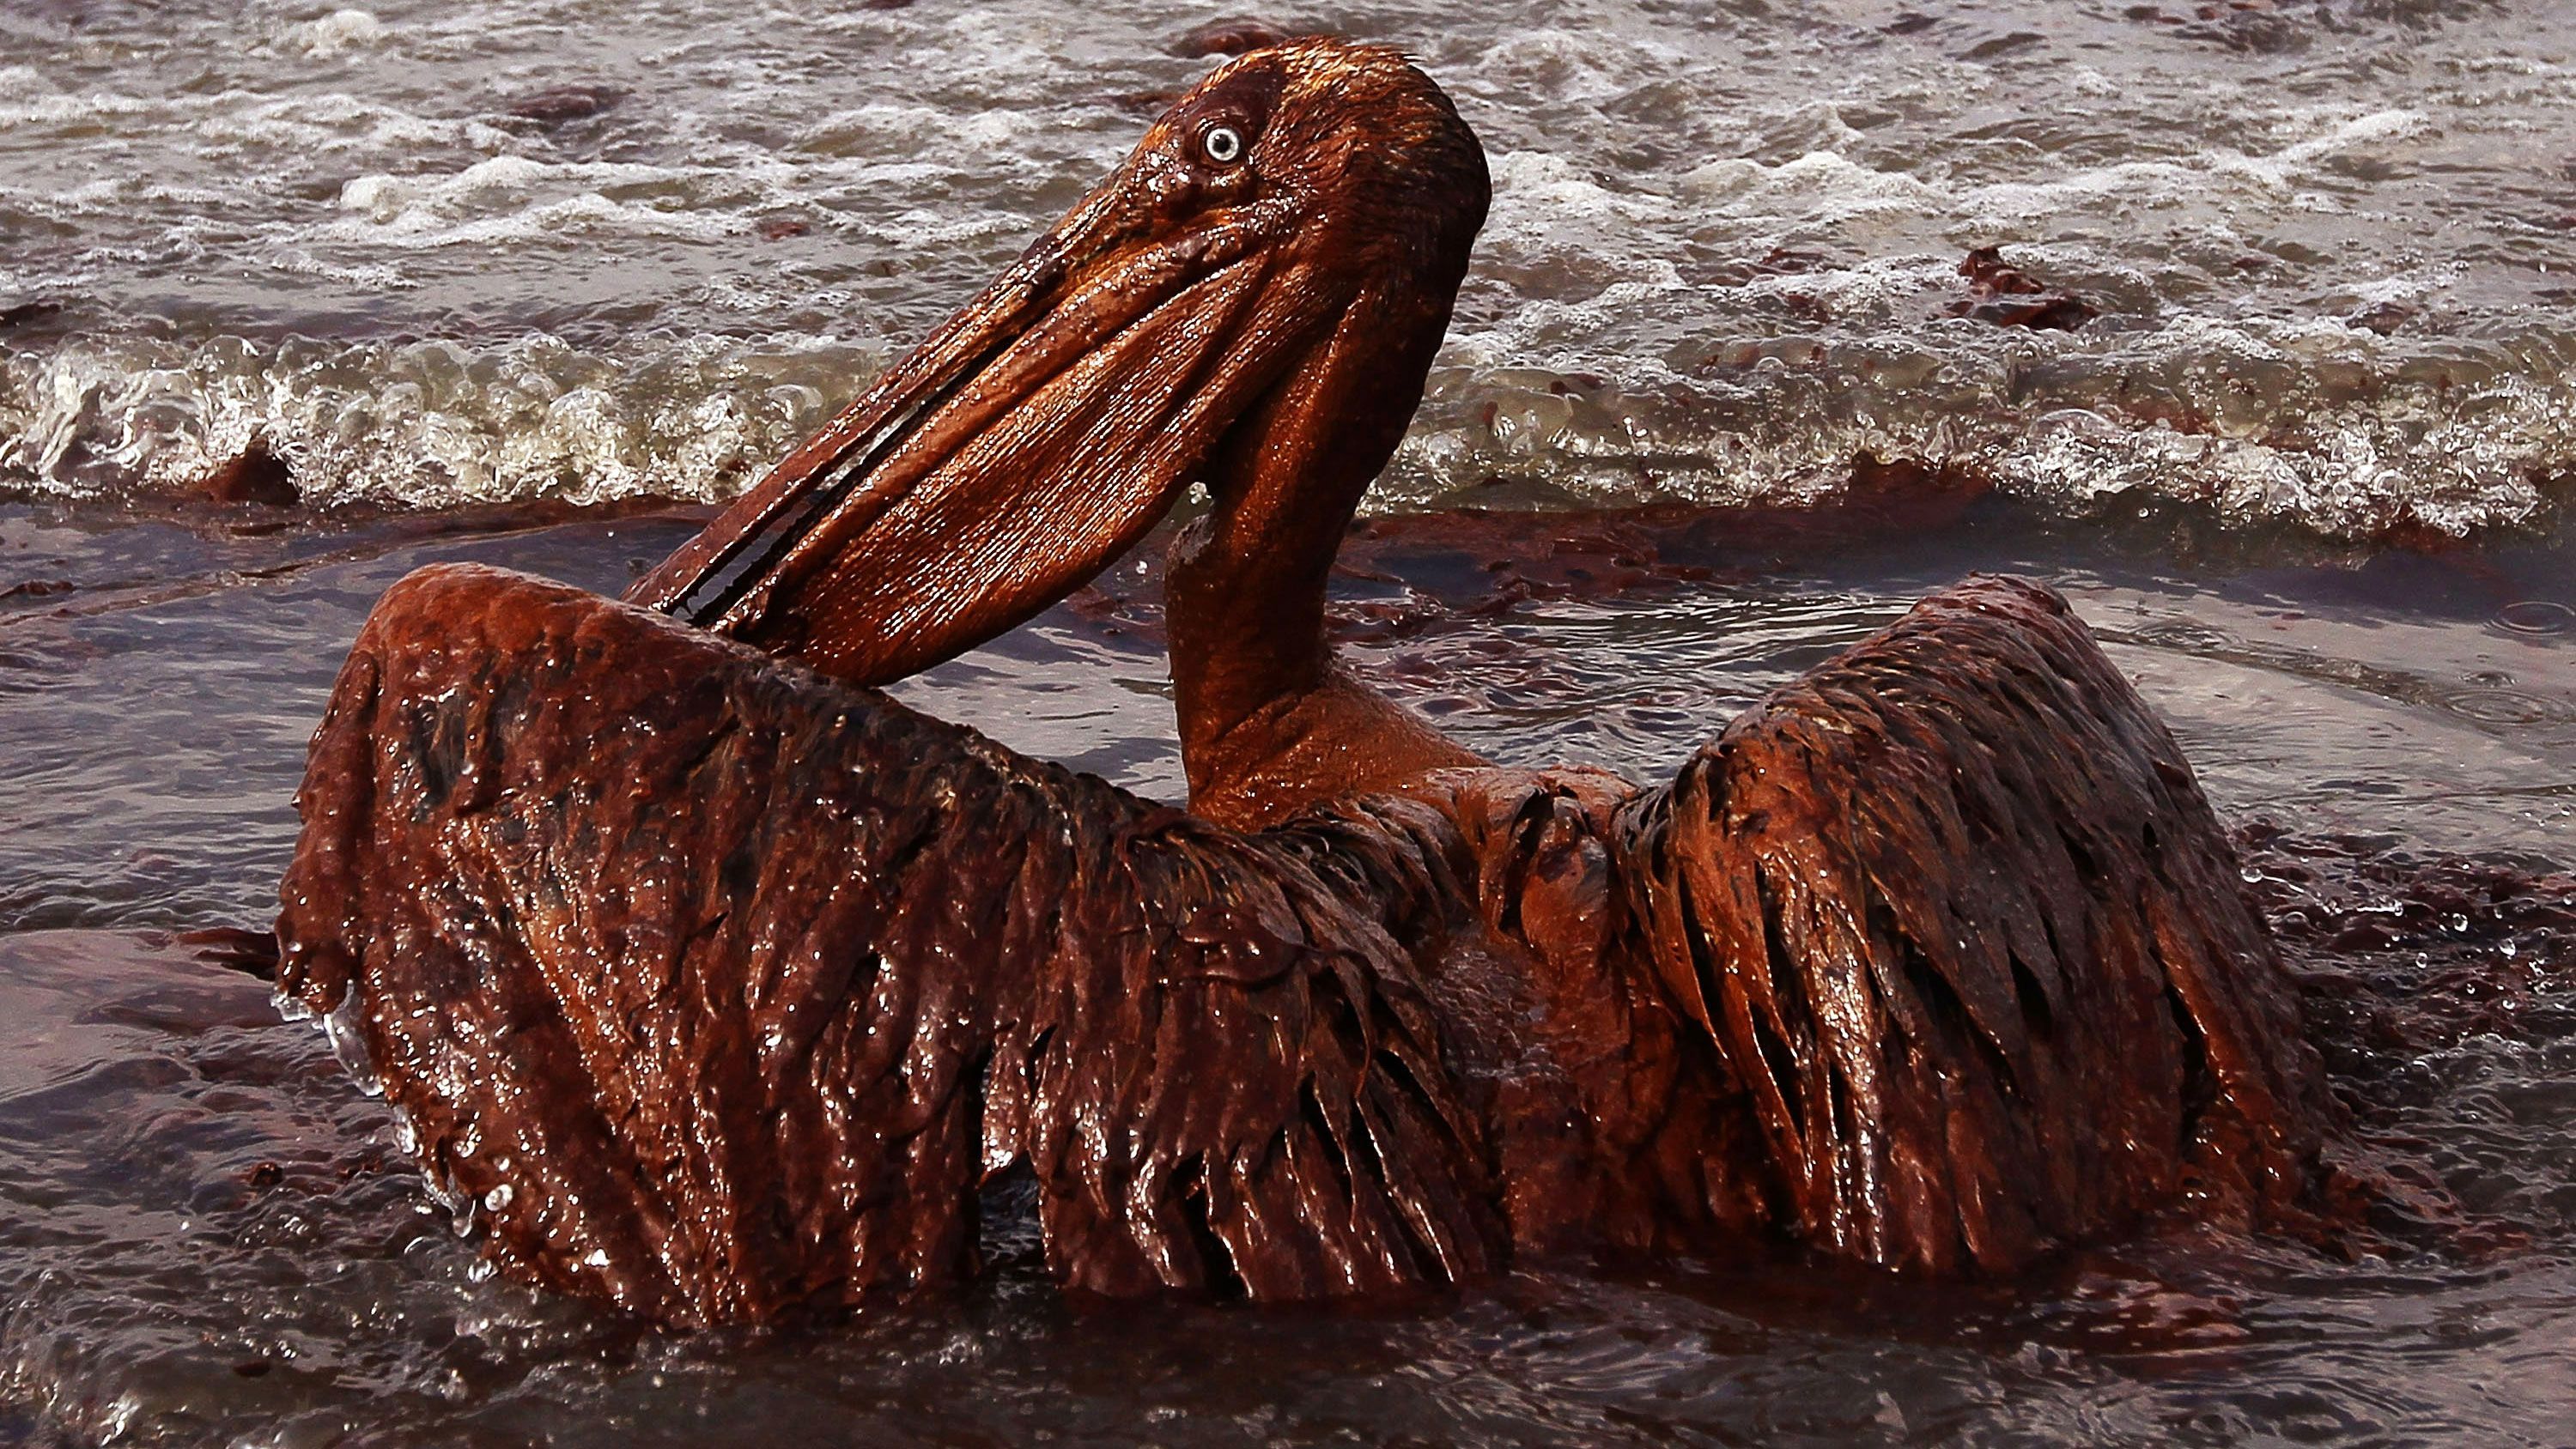 Oil spills and the threat they pose to marine life